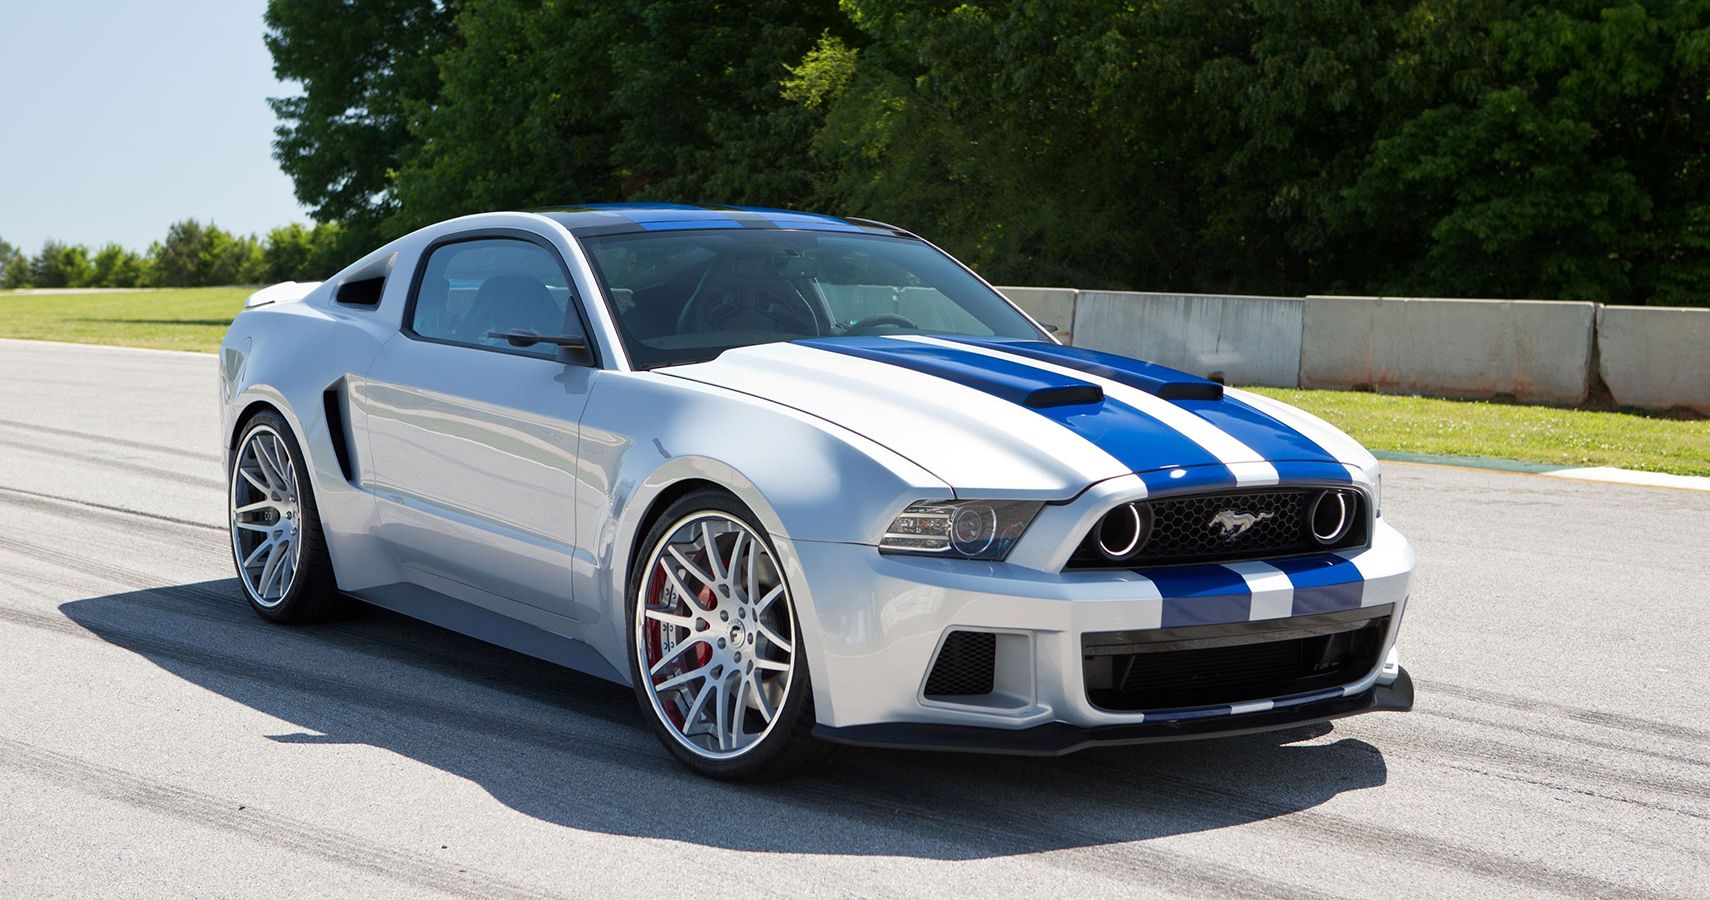 The Star Of Need For Speed Isn’t The Villainous Koenigsegg Agera, But The Rare Ford Shelby Mustang That Later Turns Out To Be The Hero Car